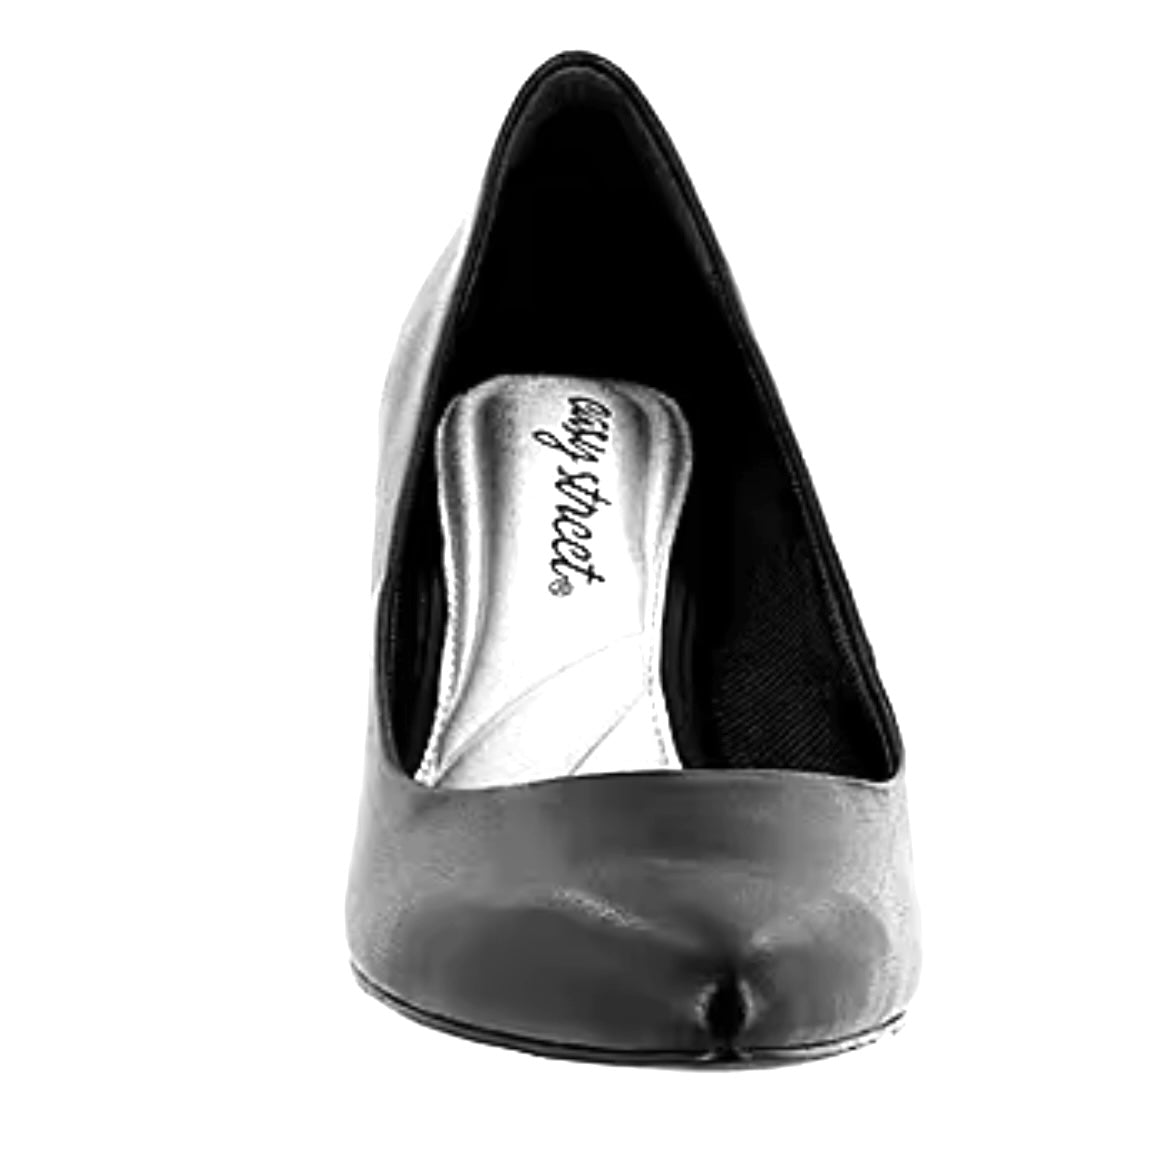 POINTE Black Pointed Toe Slip On Size 6.5 Women's Pumps Shoes